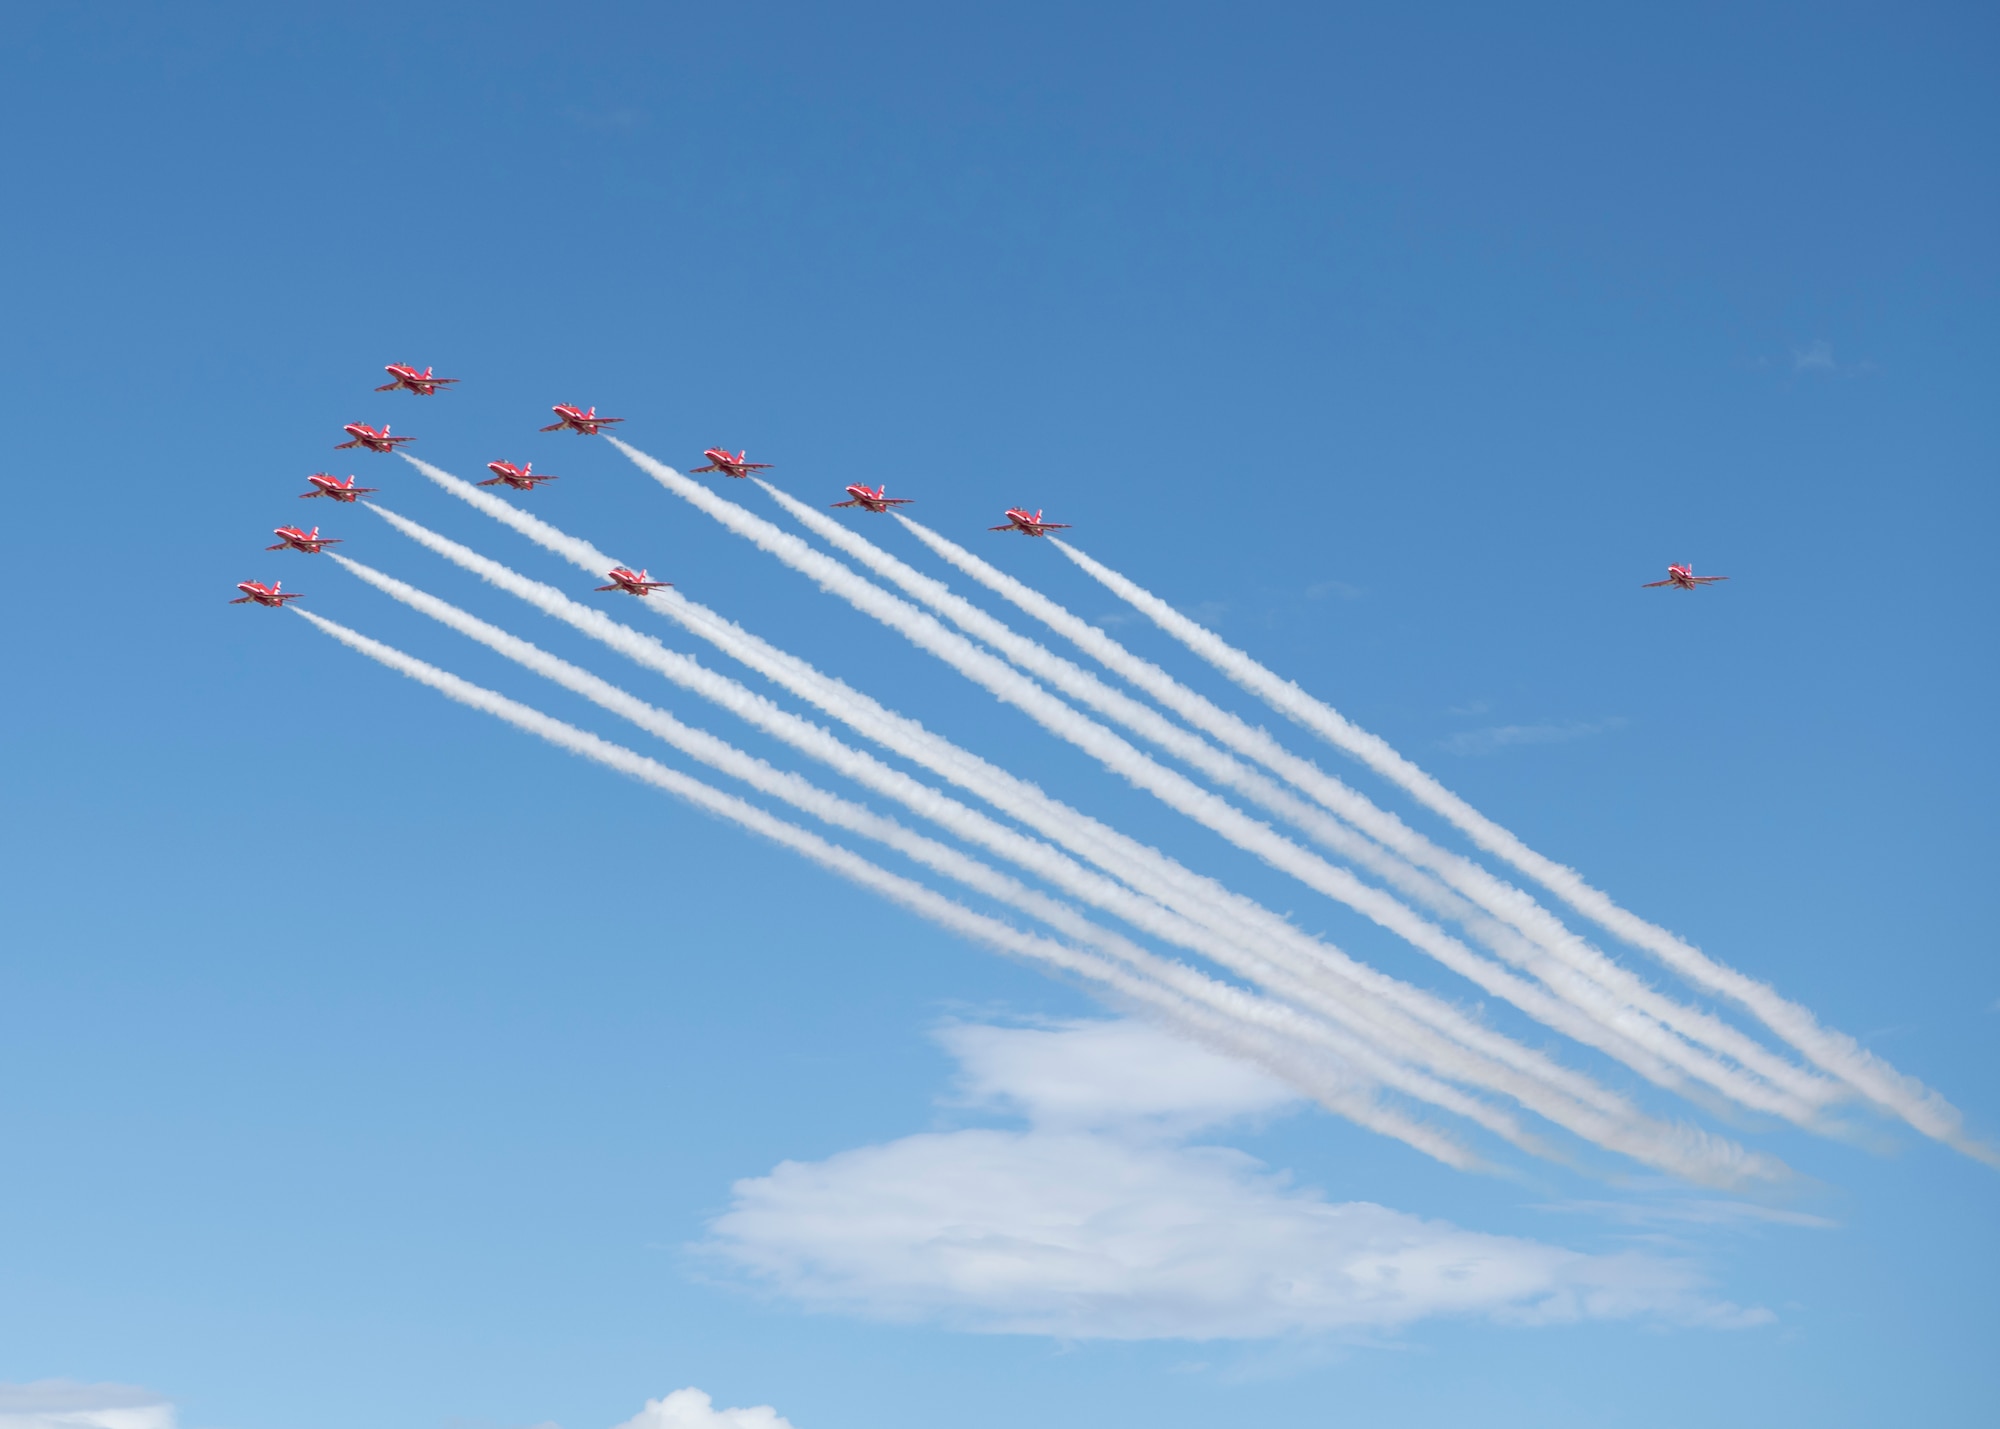 Royal Air Force aerial demonstration team the Red Arrows flies past Peterson Air Force Base, Colorado, before landing Sept. 16, 2019. The team stopped at the base briefly as part of their North American tour. (U.S. Air Force photo by Heather Heiney)